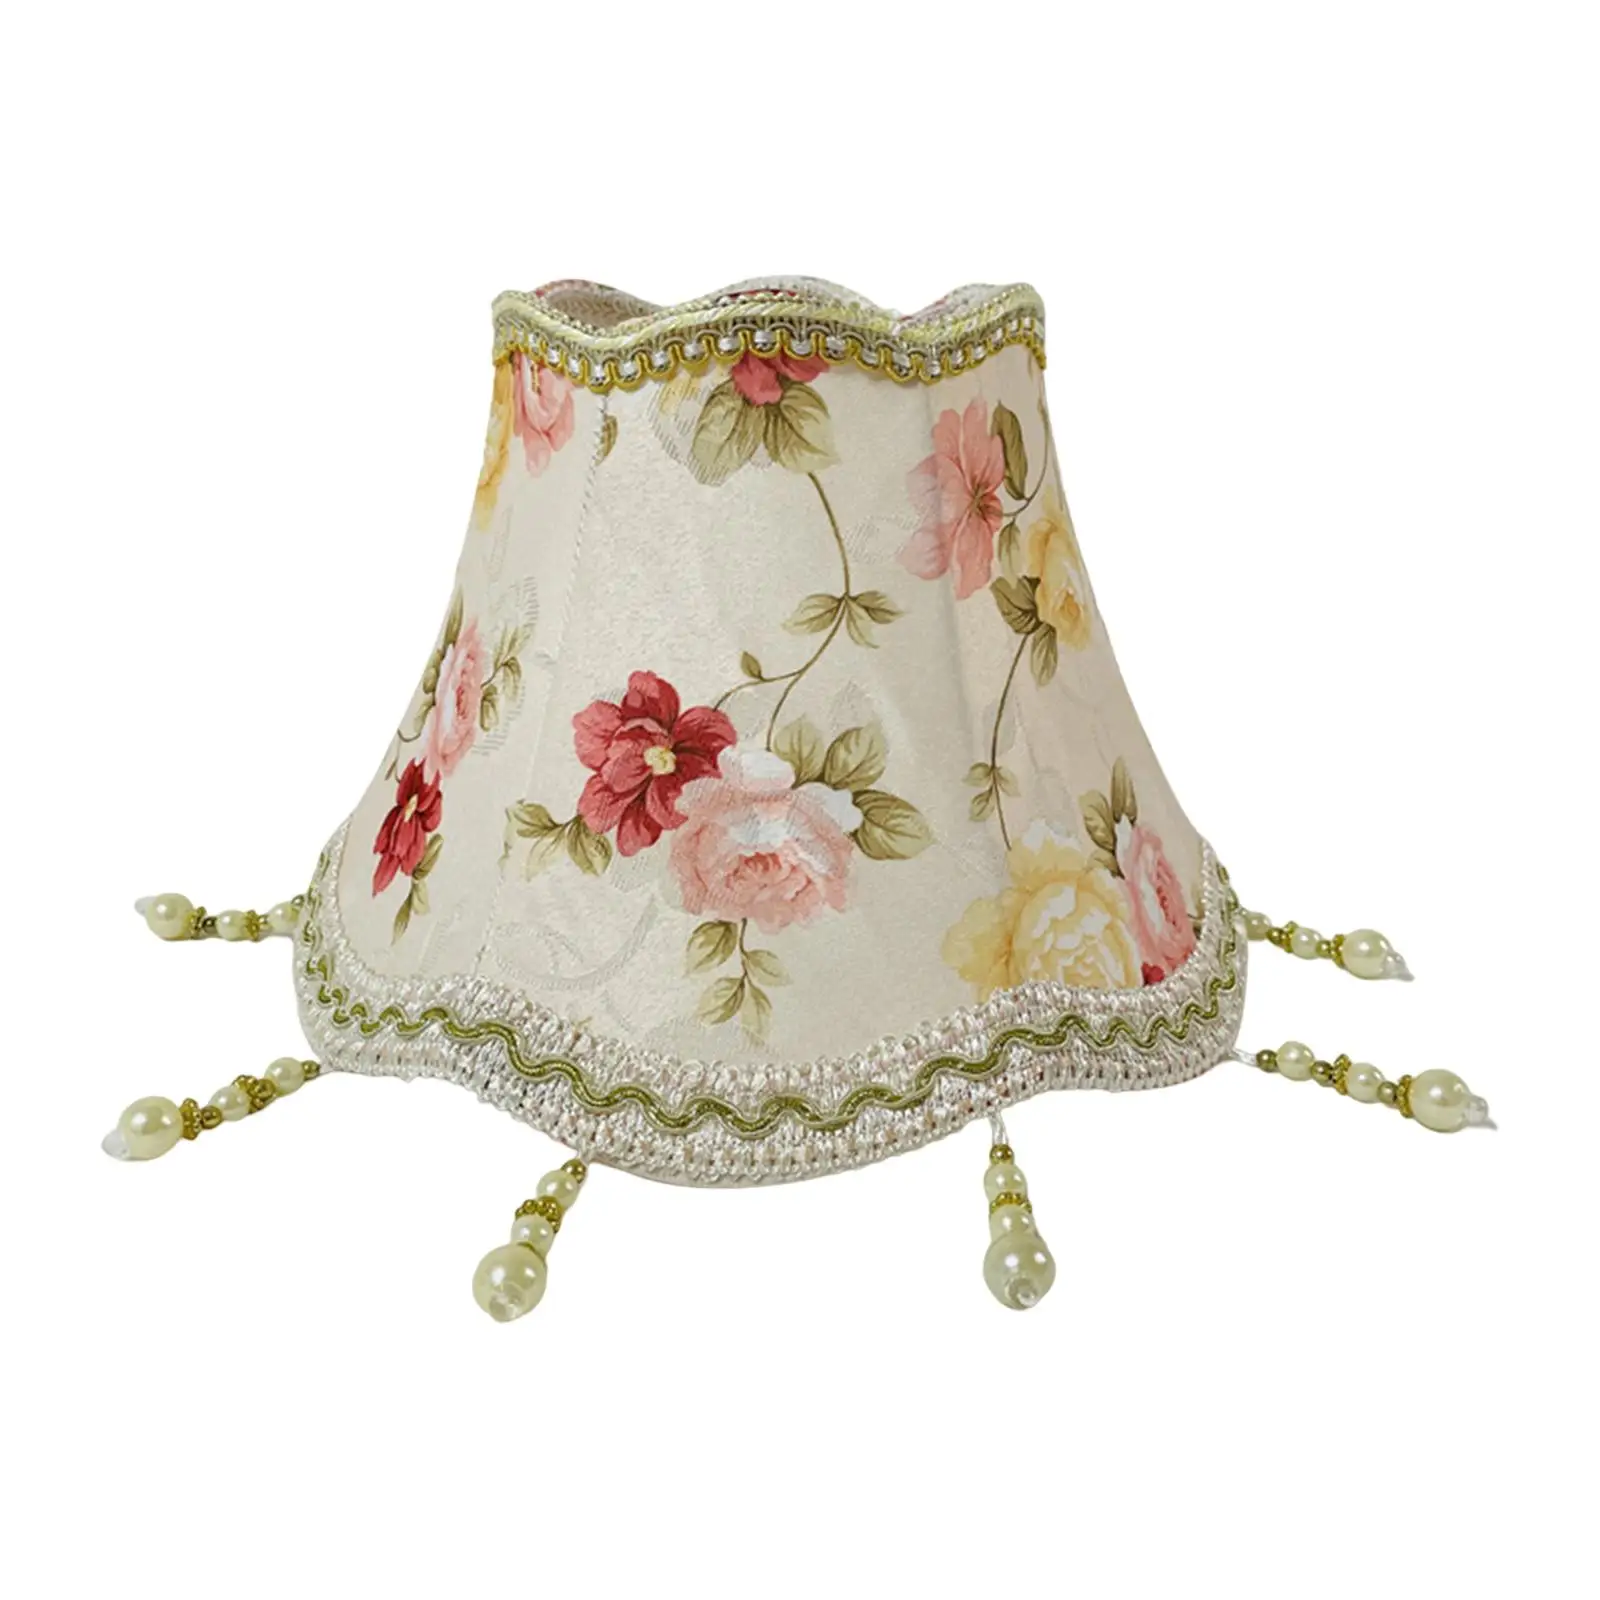 Fabric Lampshade Vintage Style Flower Pattern Lamp Shade with Fringe